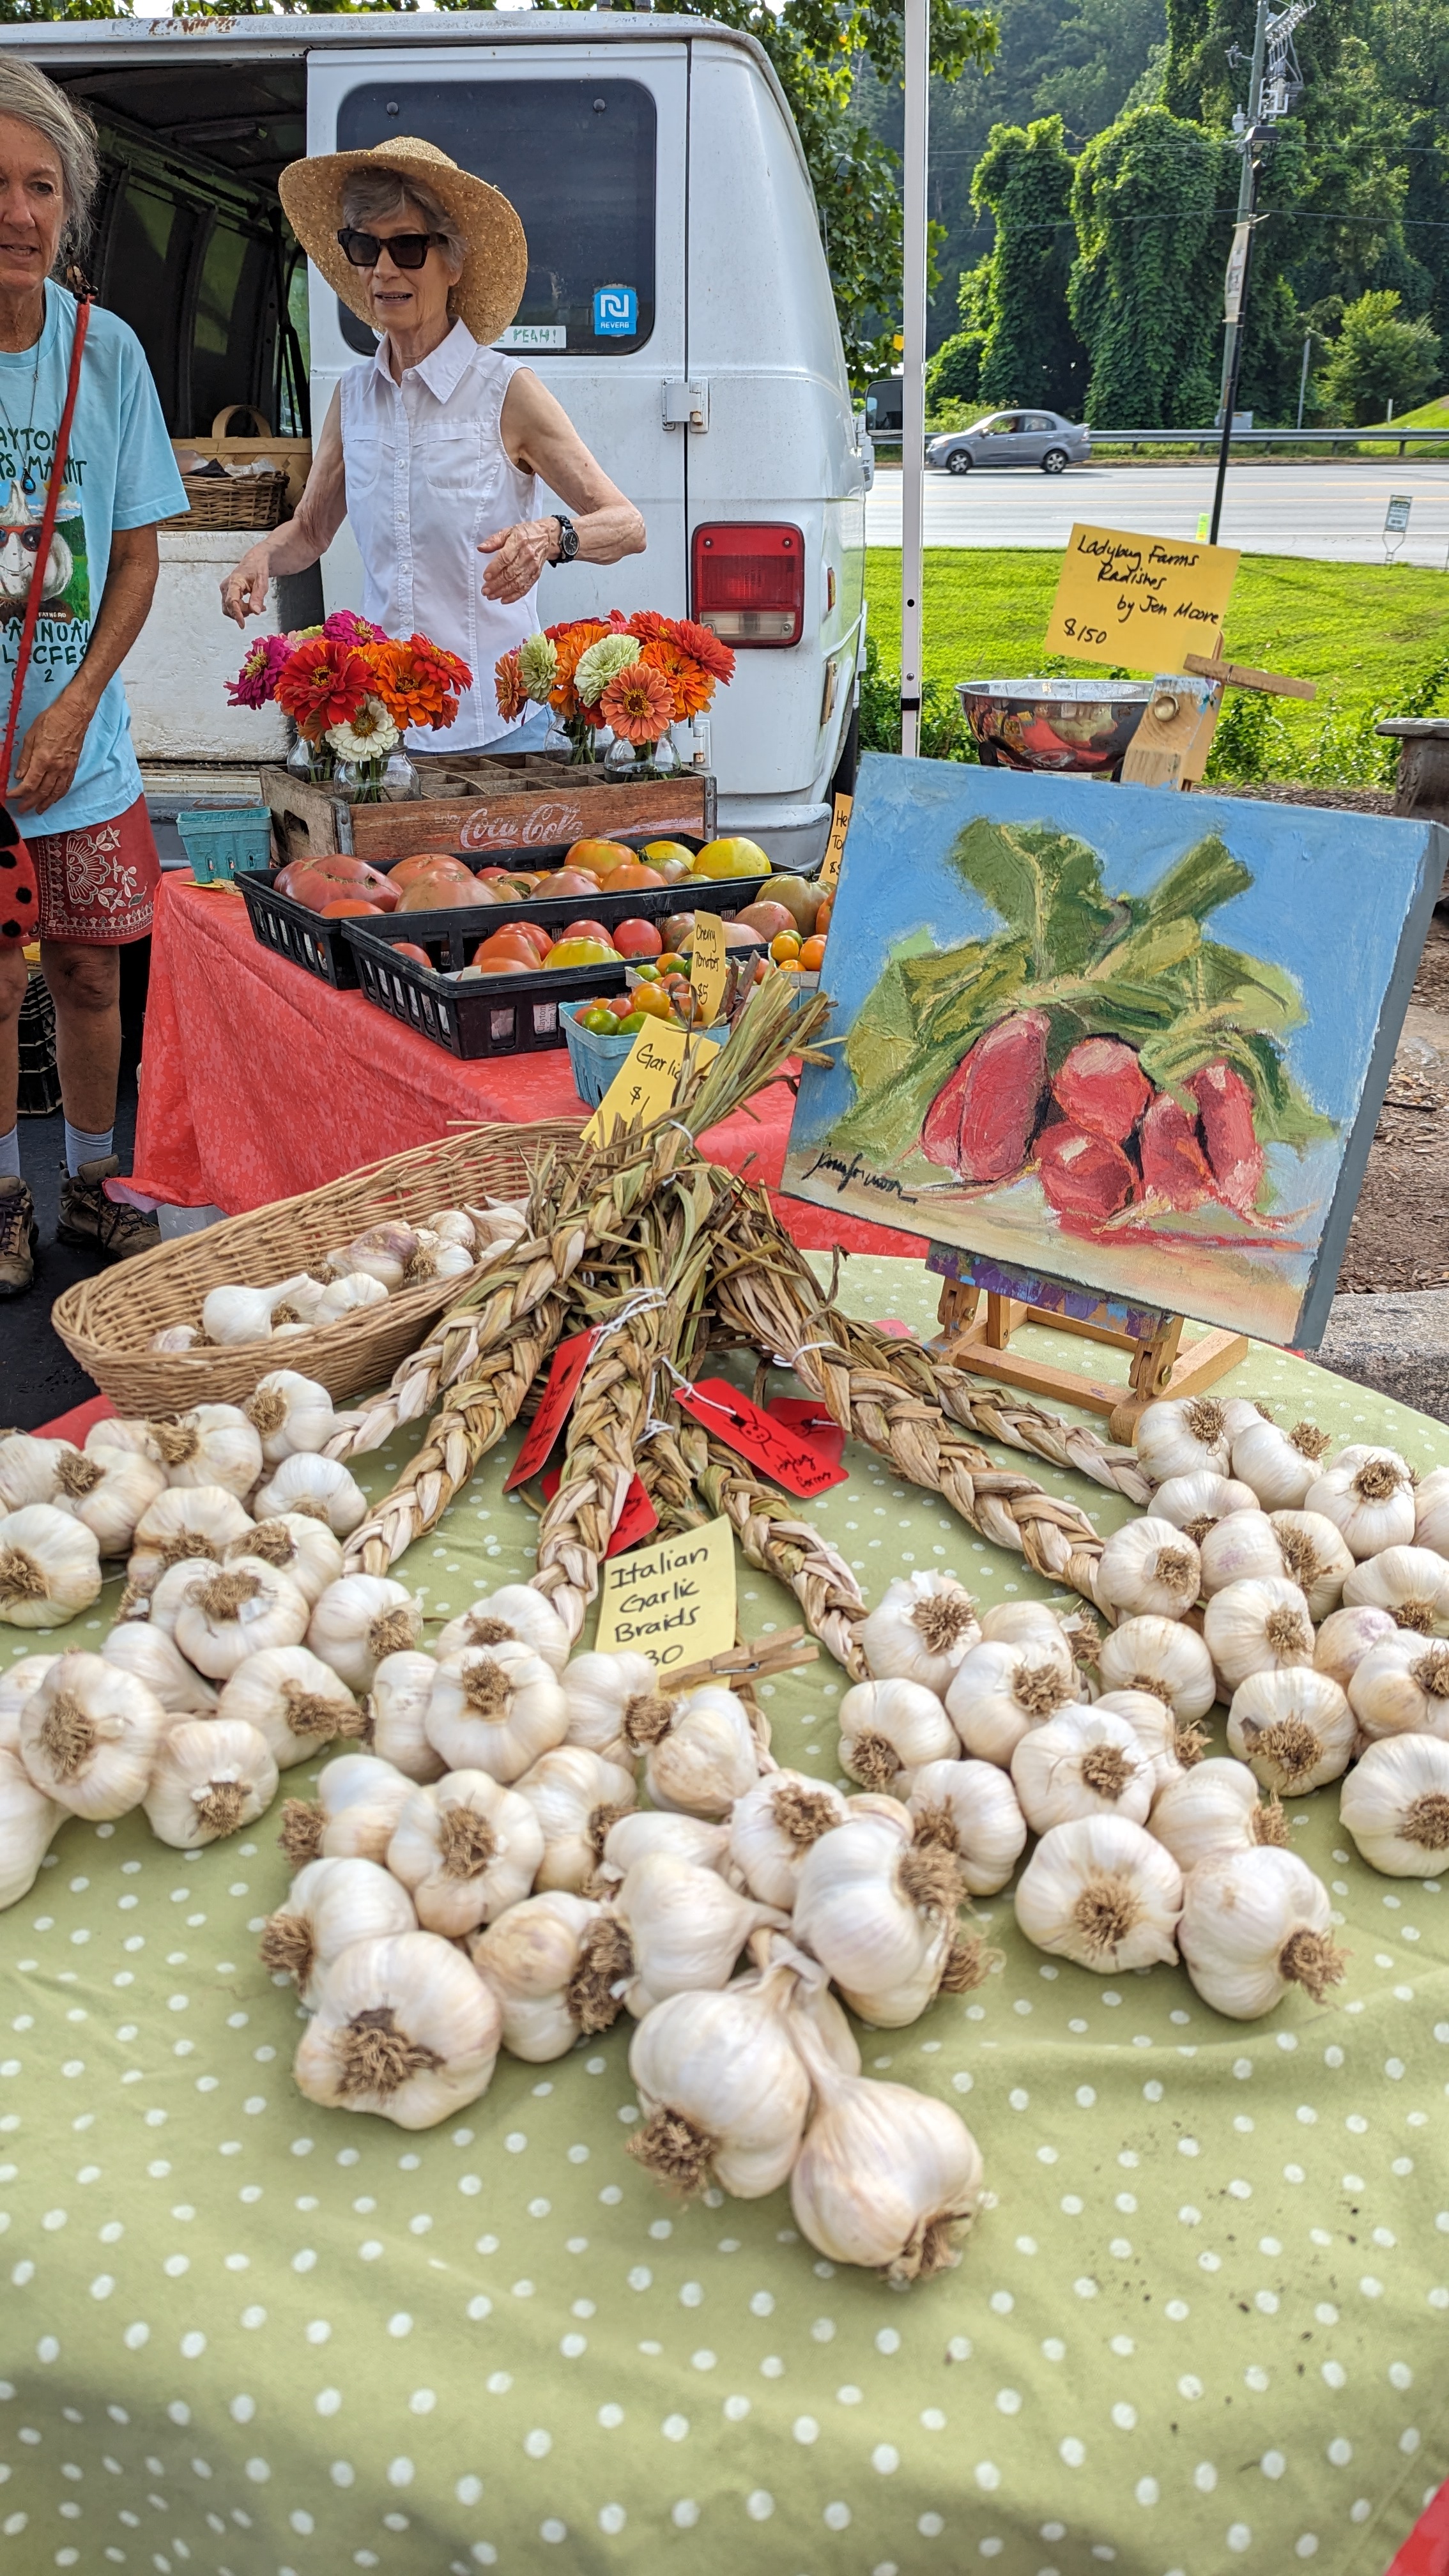 Submitted photo. The Clayton Farmers Market held its 10th annual Garlic Fest Saturday, July 29, with over 20 vendors selling garlic-inspired items, fresh produce, handmade goods and much more.